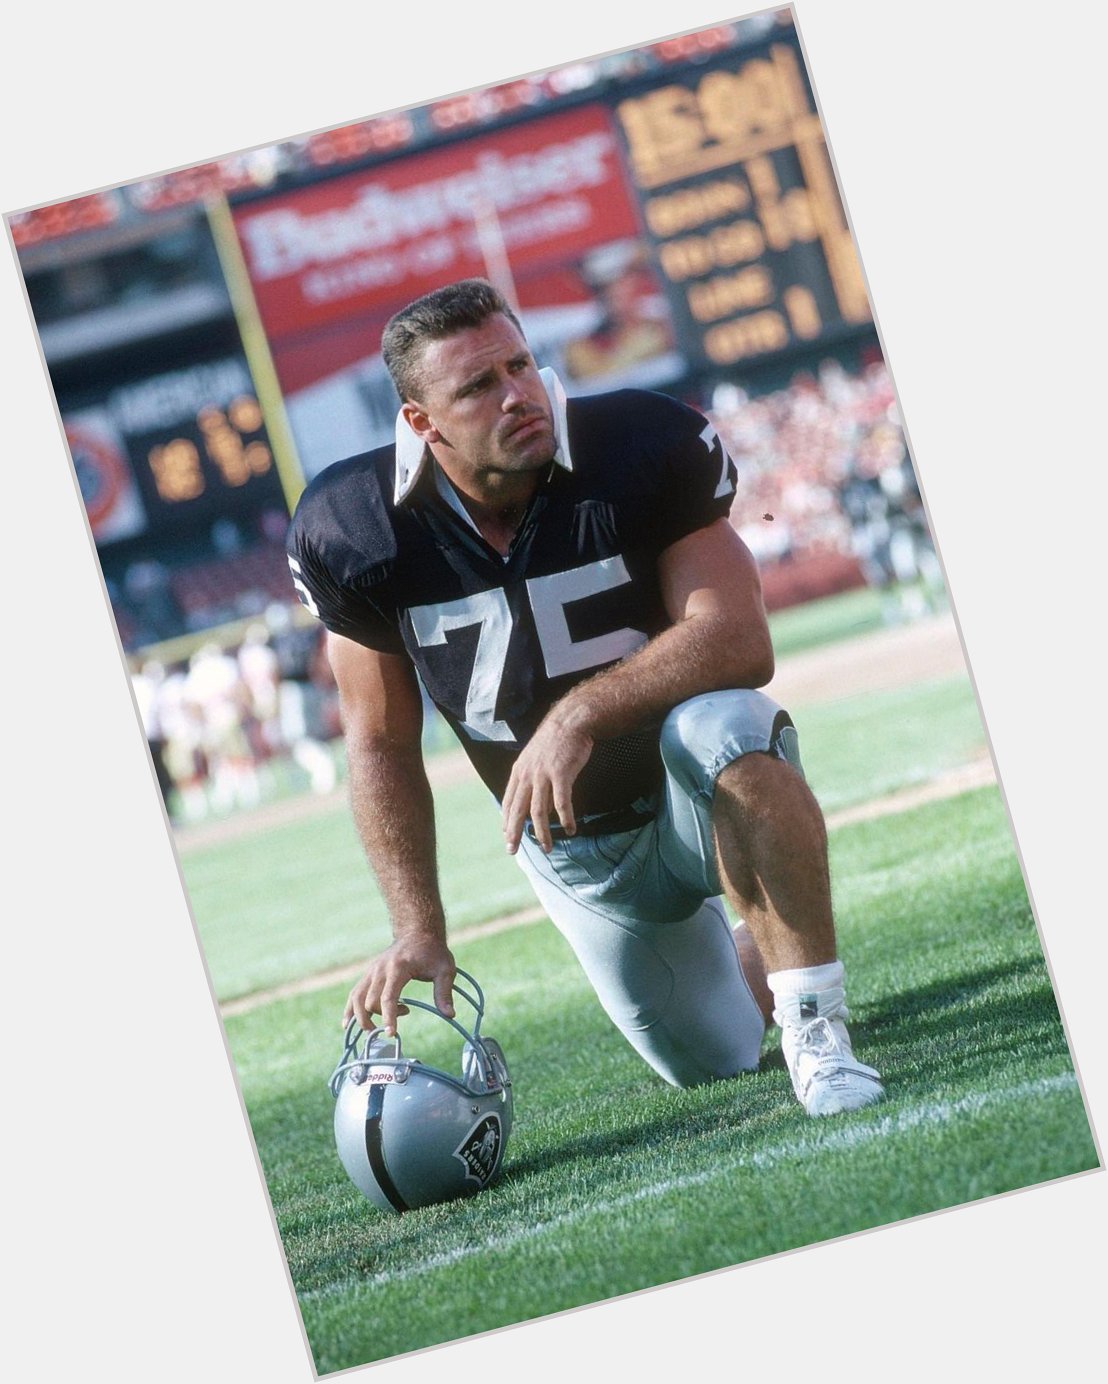  Happy birthday to Howie long 